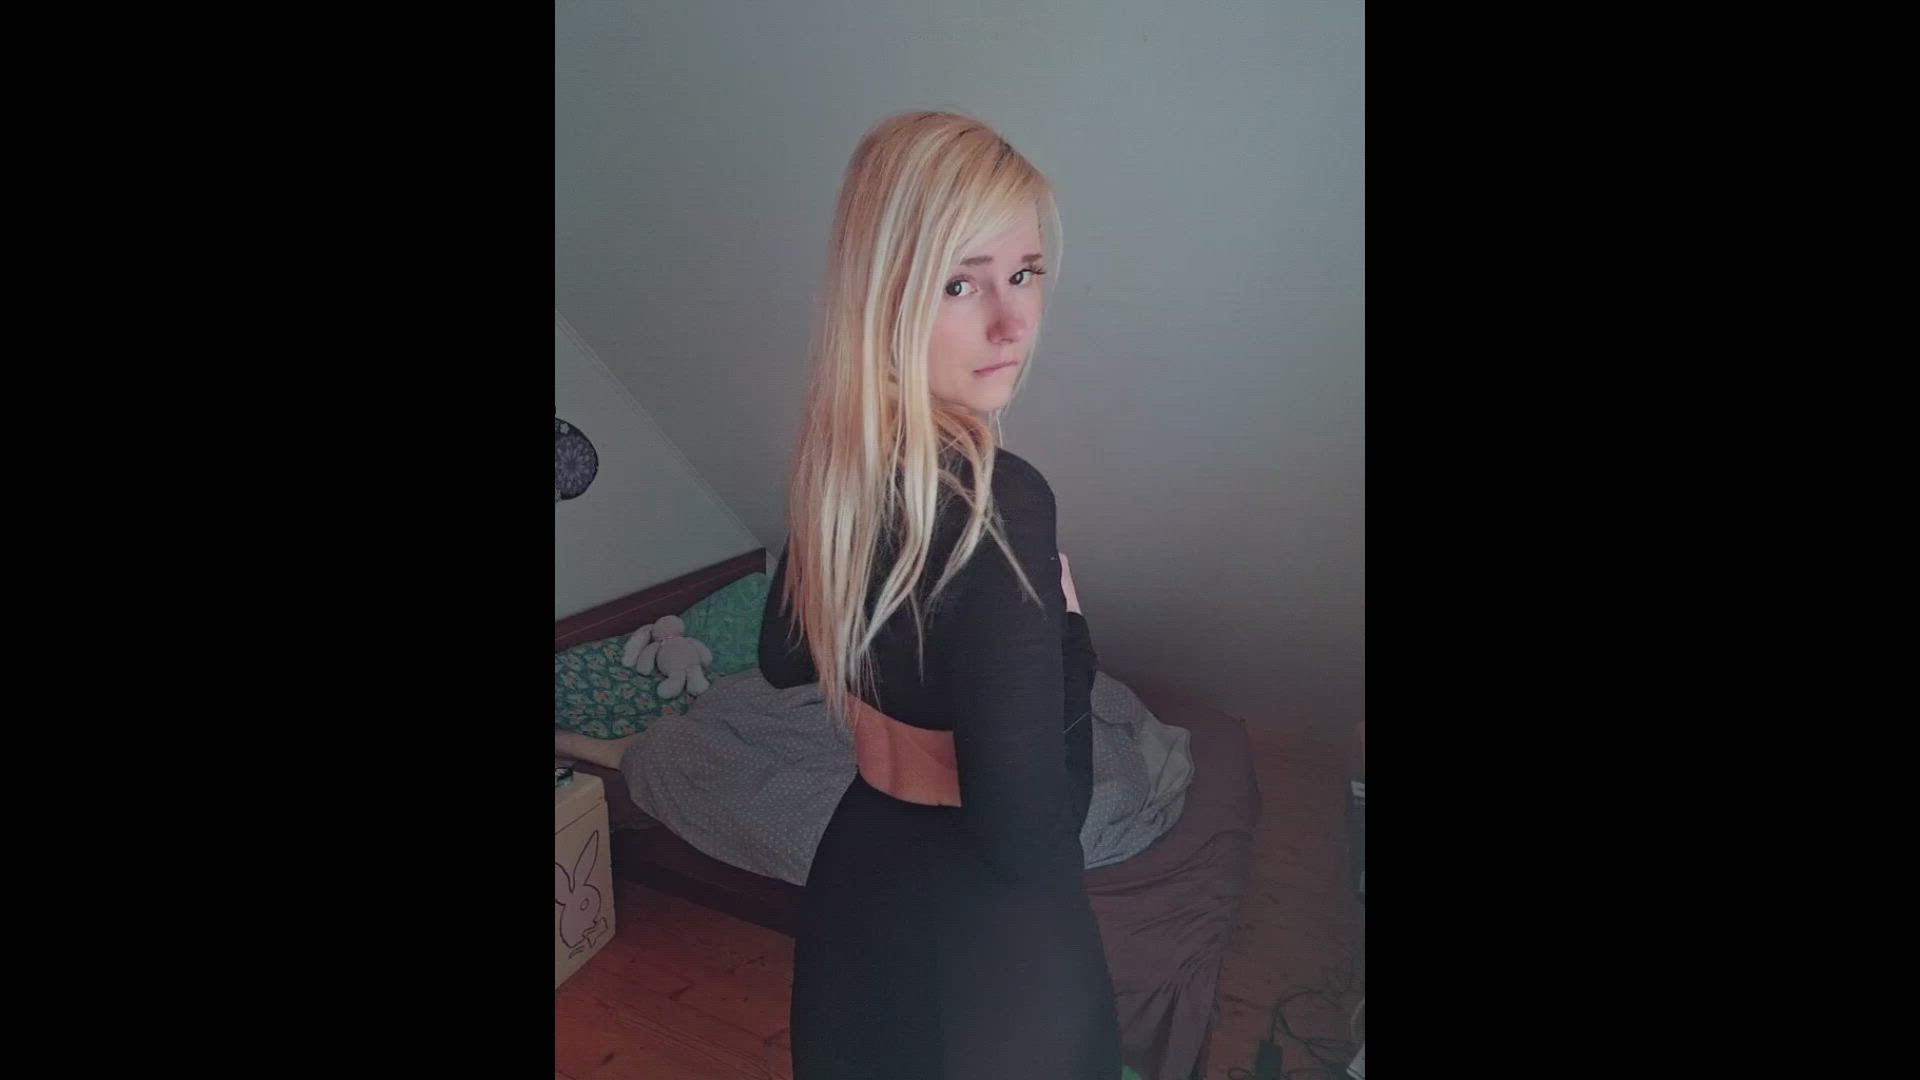 Blonde porn video with onlyfans model Lola <strong>@deerlola19</strong>